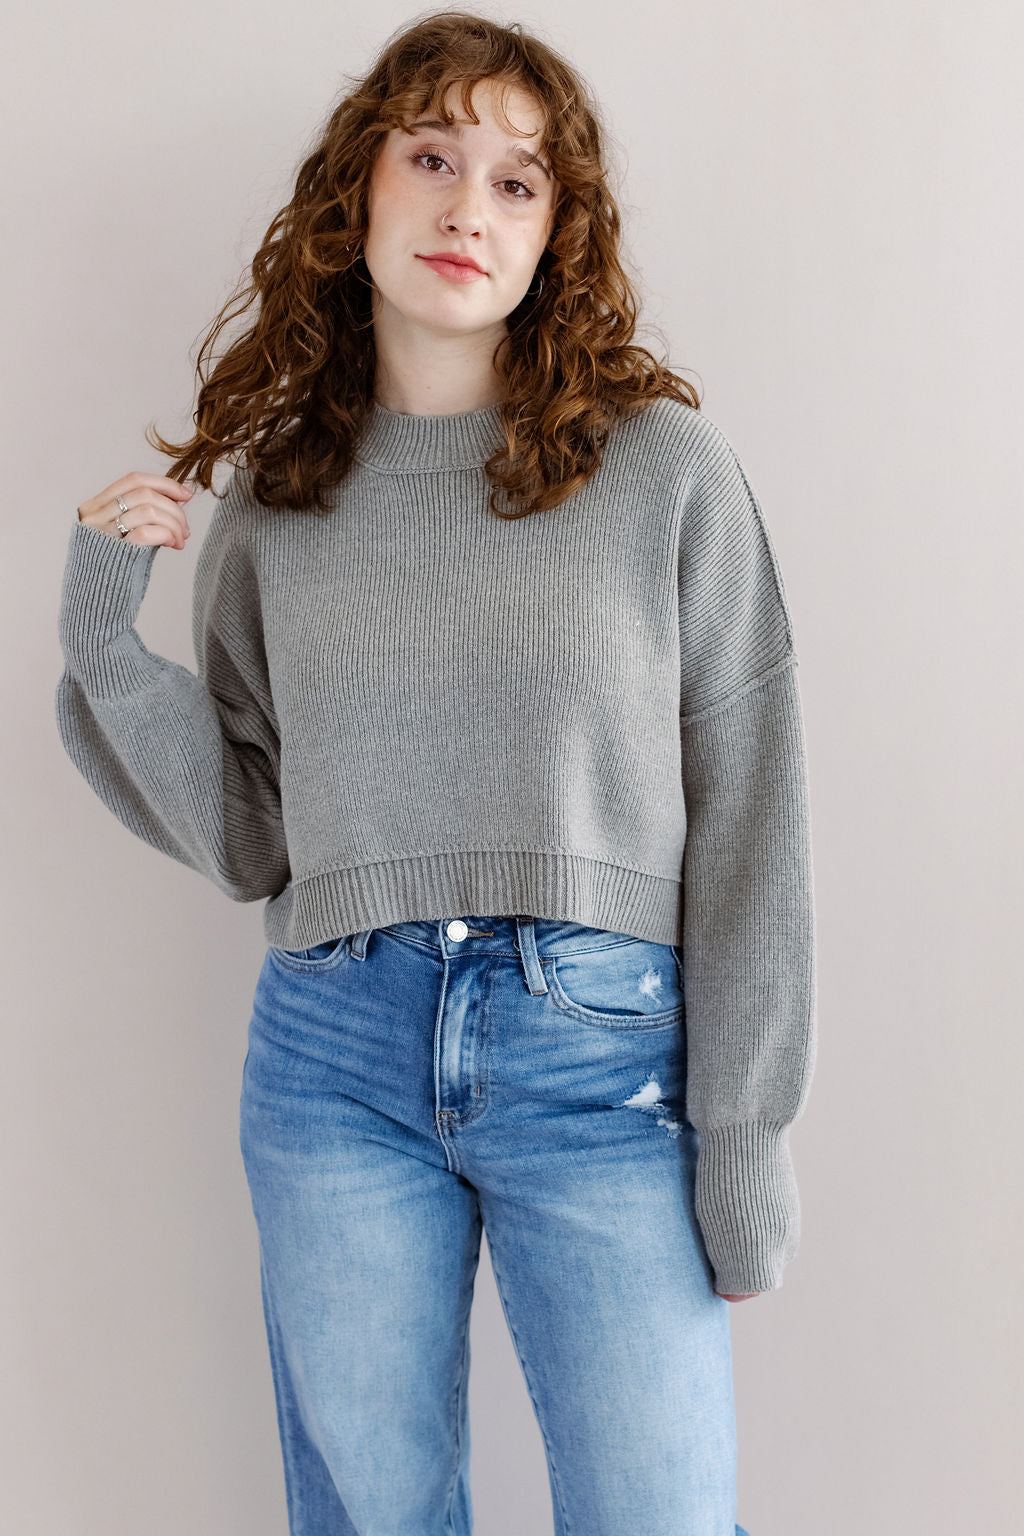 Free People | Easy Street Crop Pullover | Heather Grey - Poppy and Stella